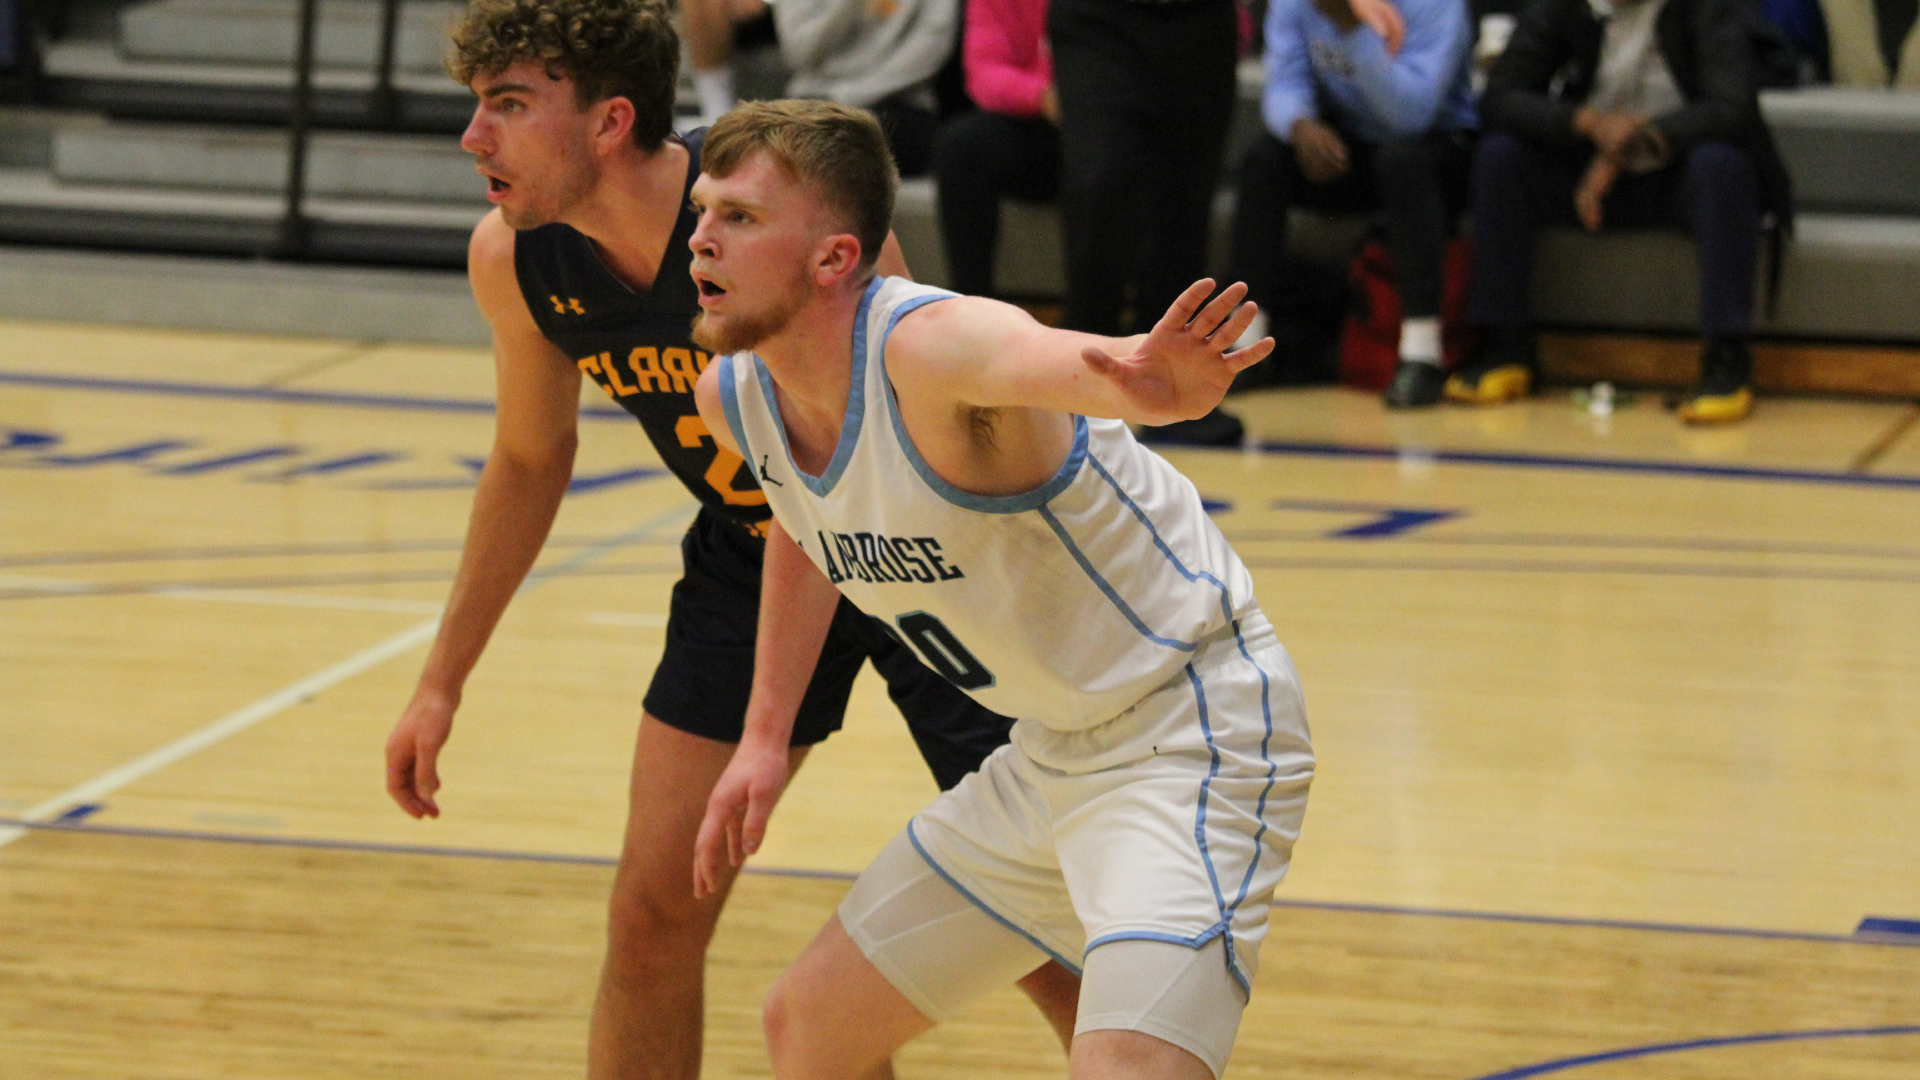 St. Ambrose drops CCAC opener at Judson